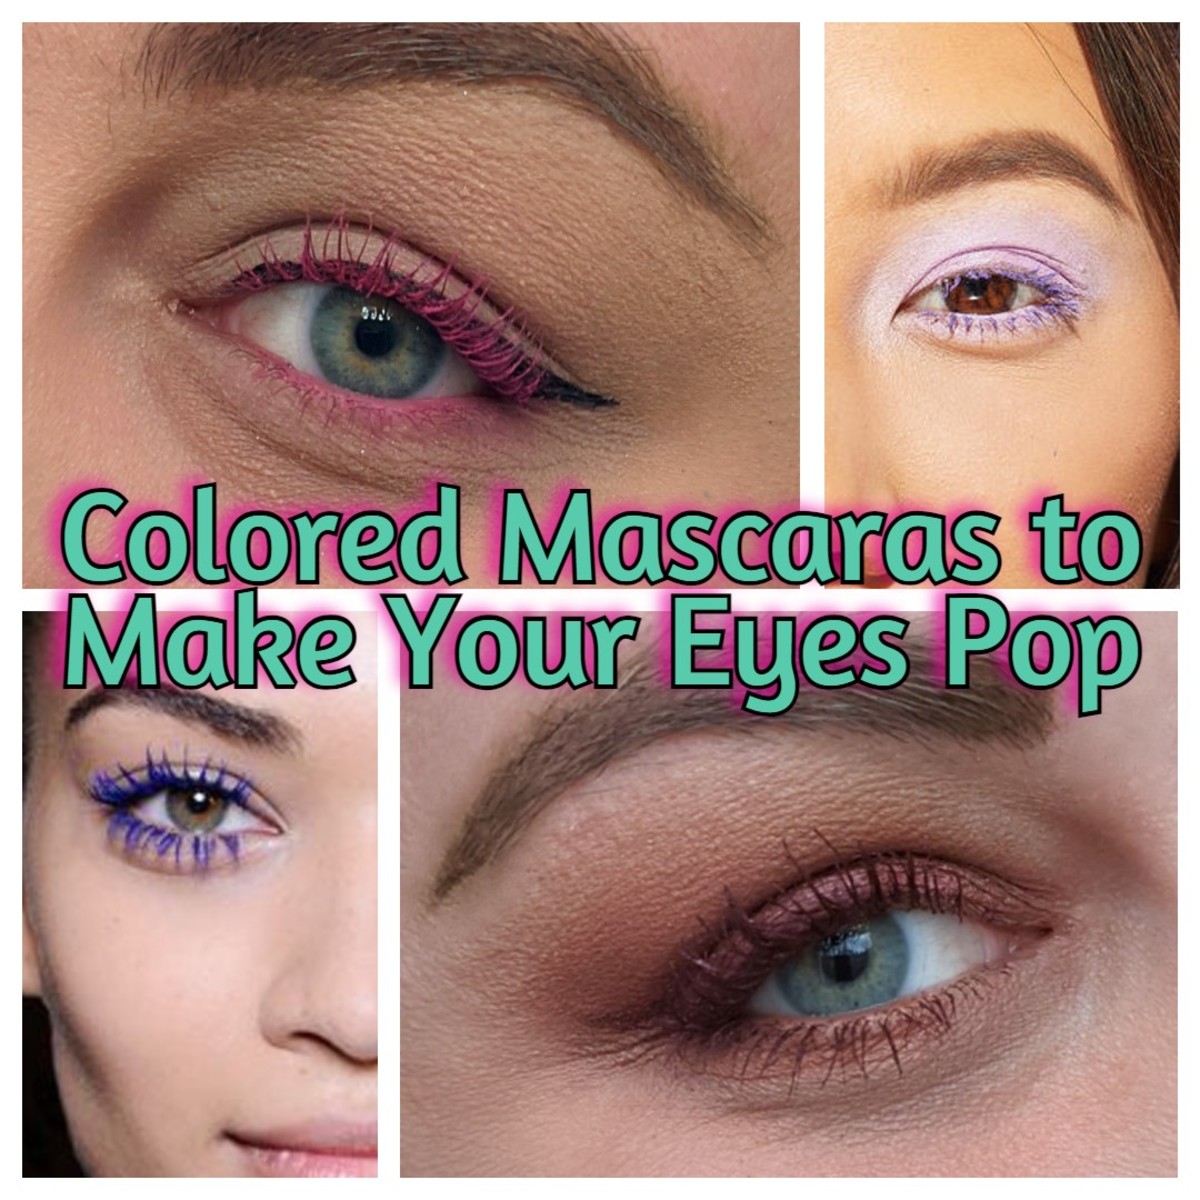 Make your eye color pop with colored mascara.